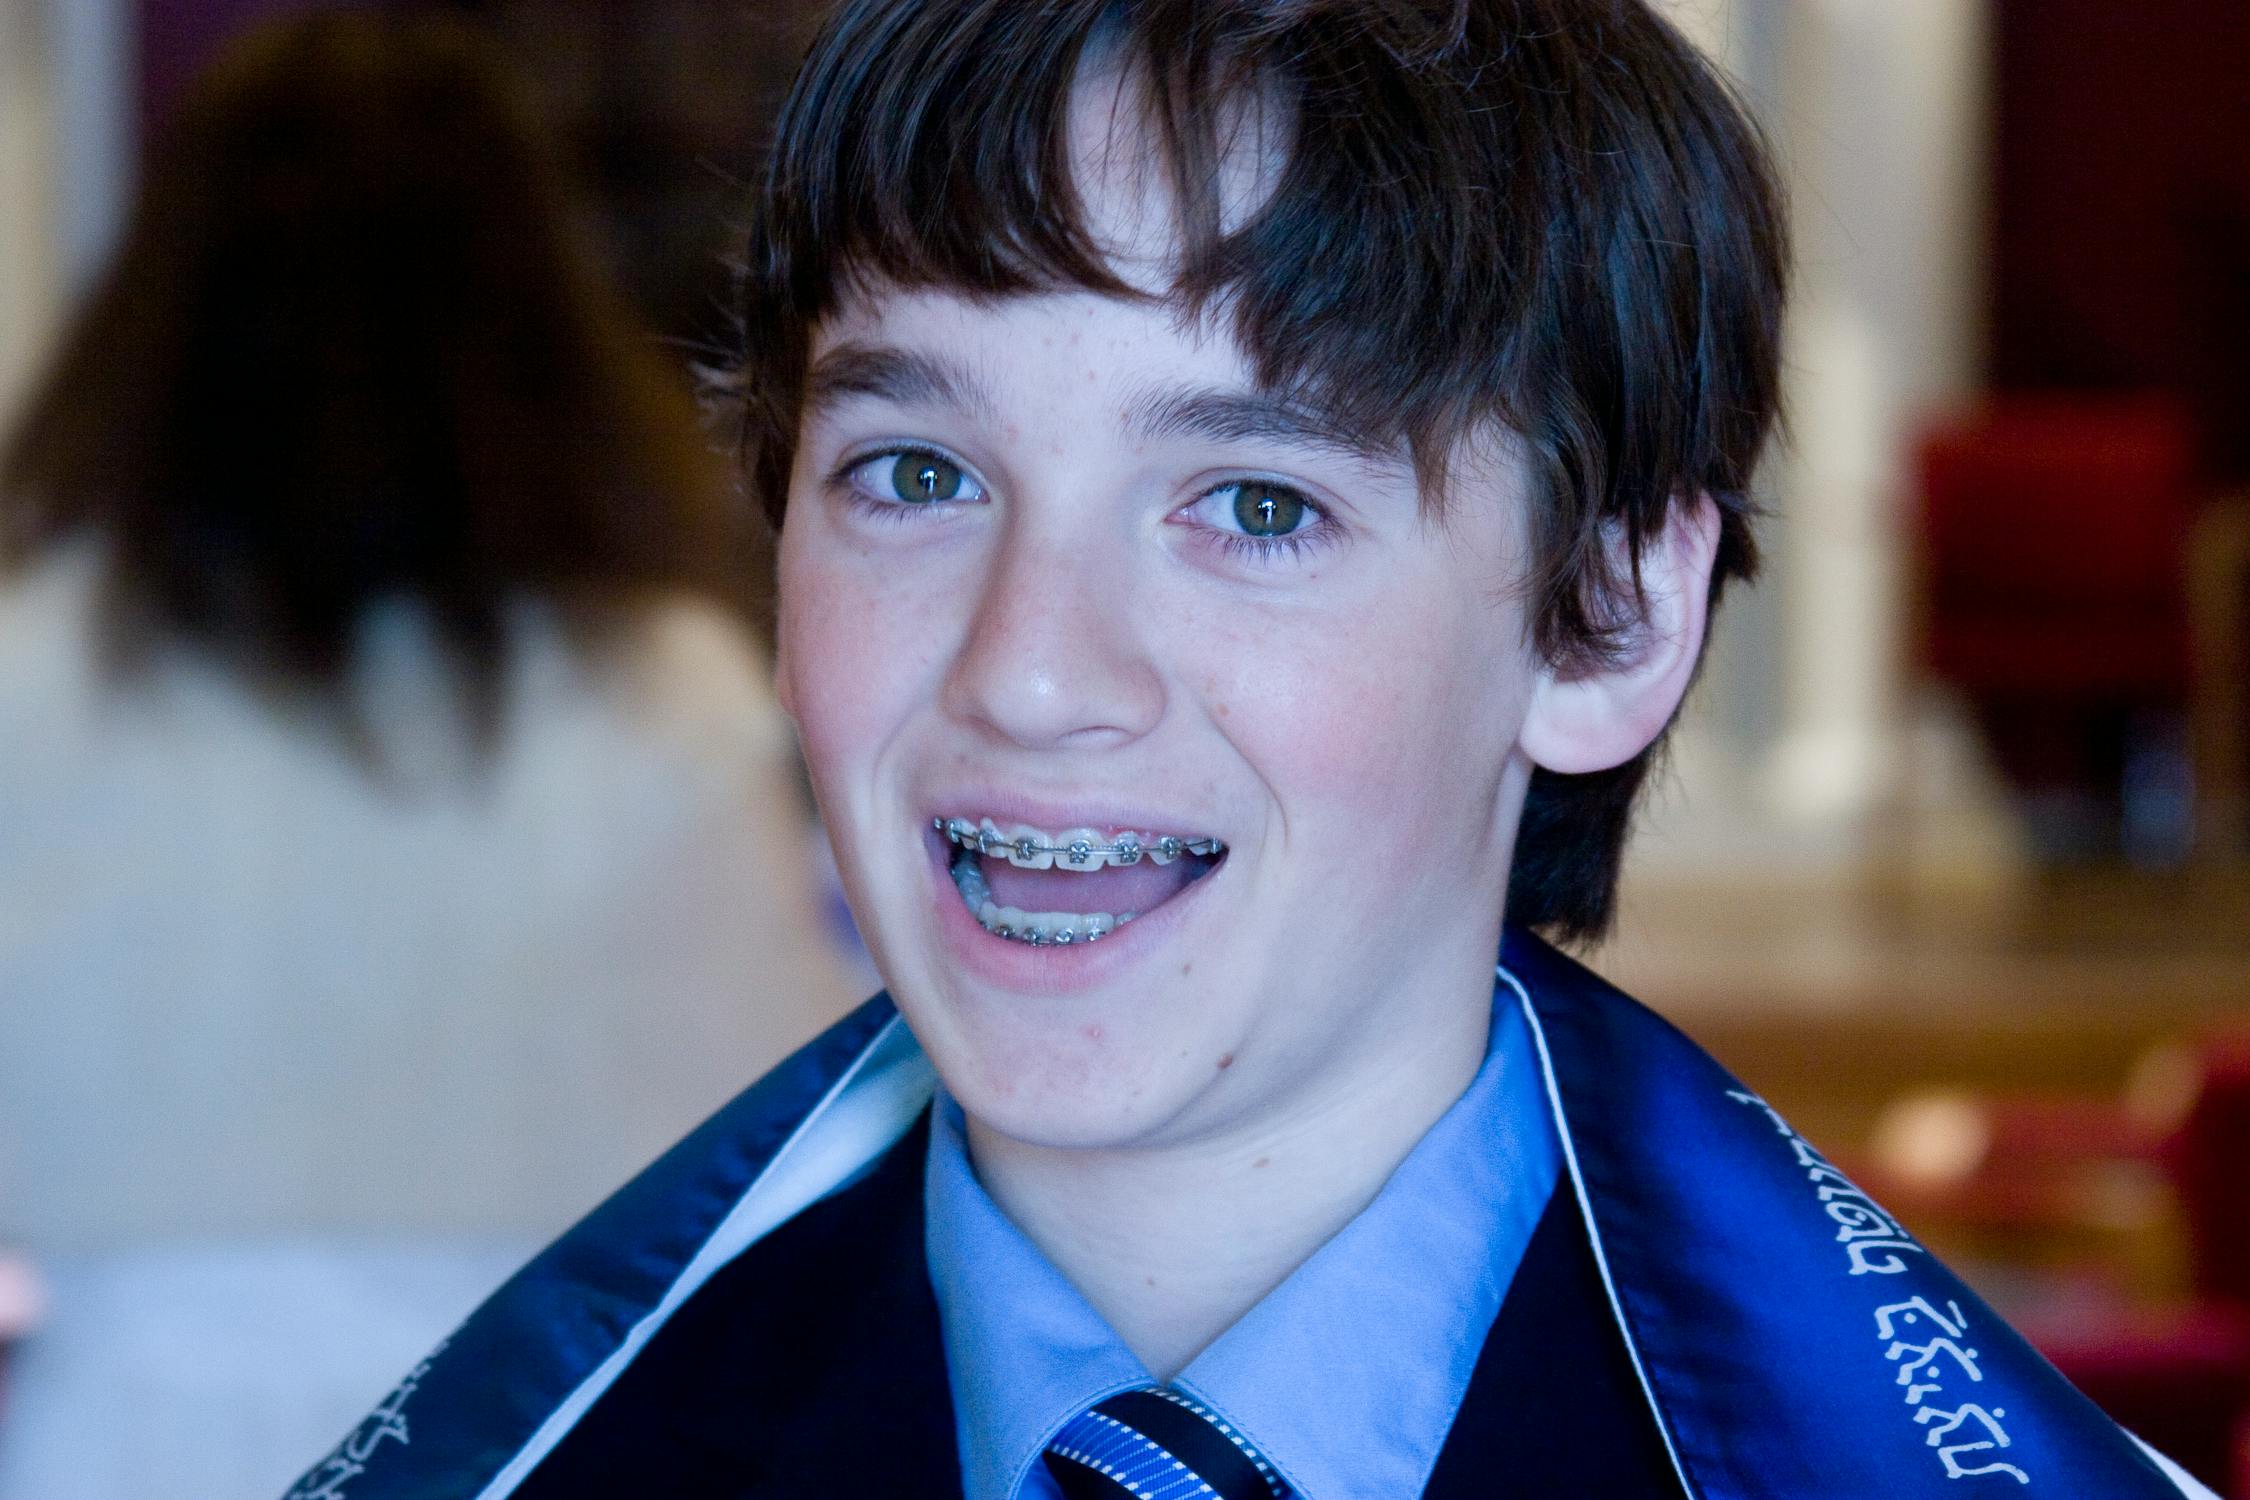 free photo of smiling boy with teeth braces